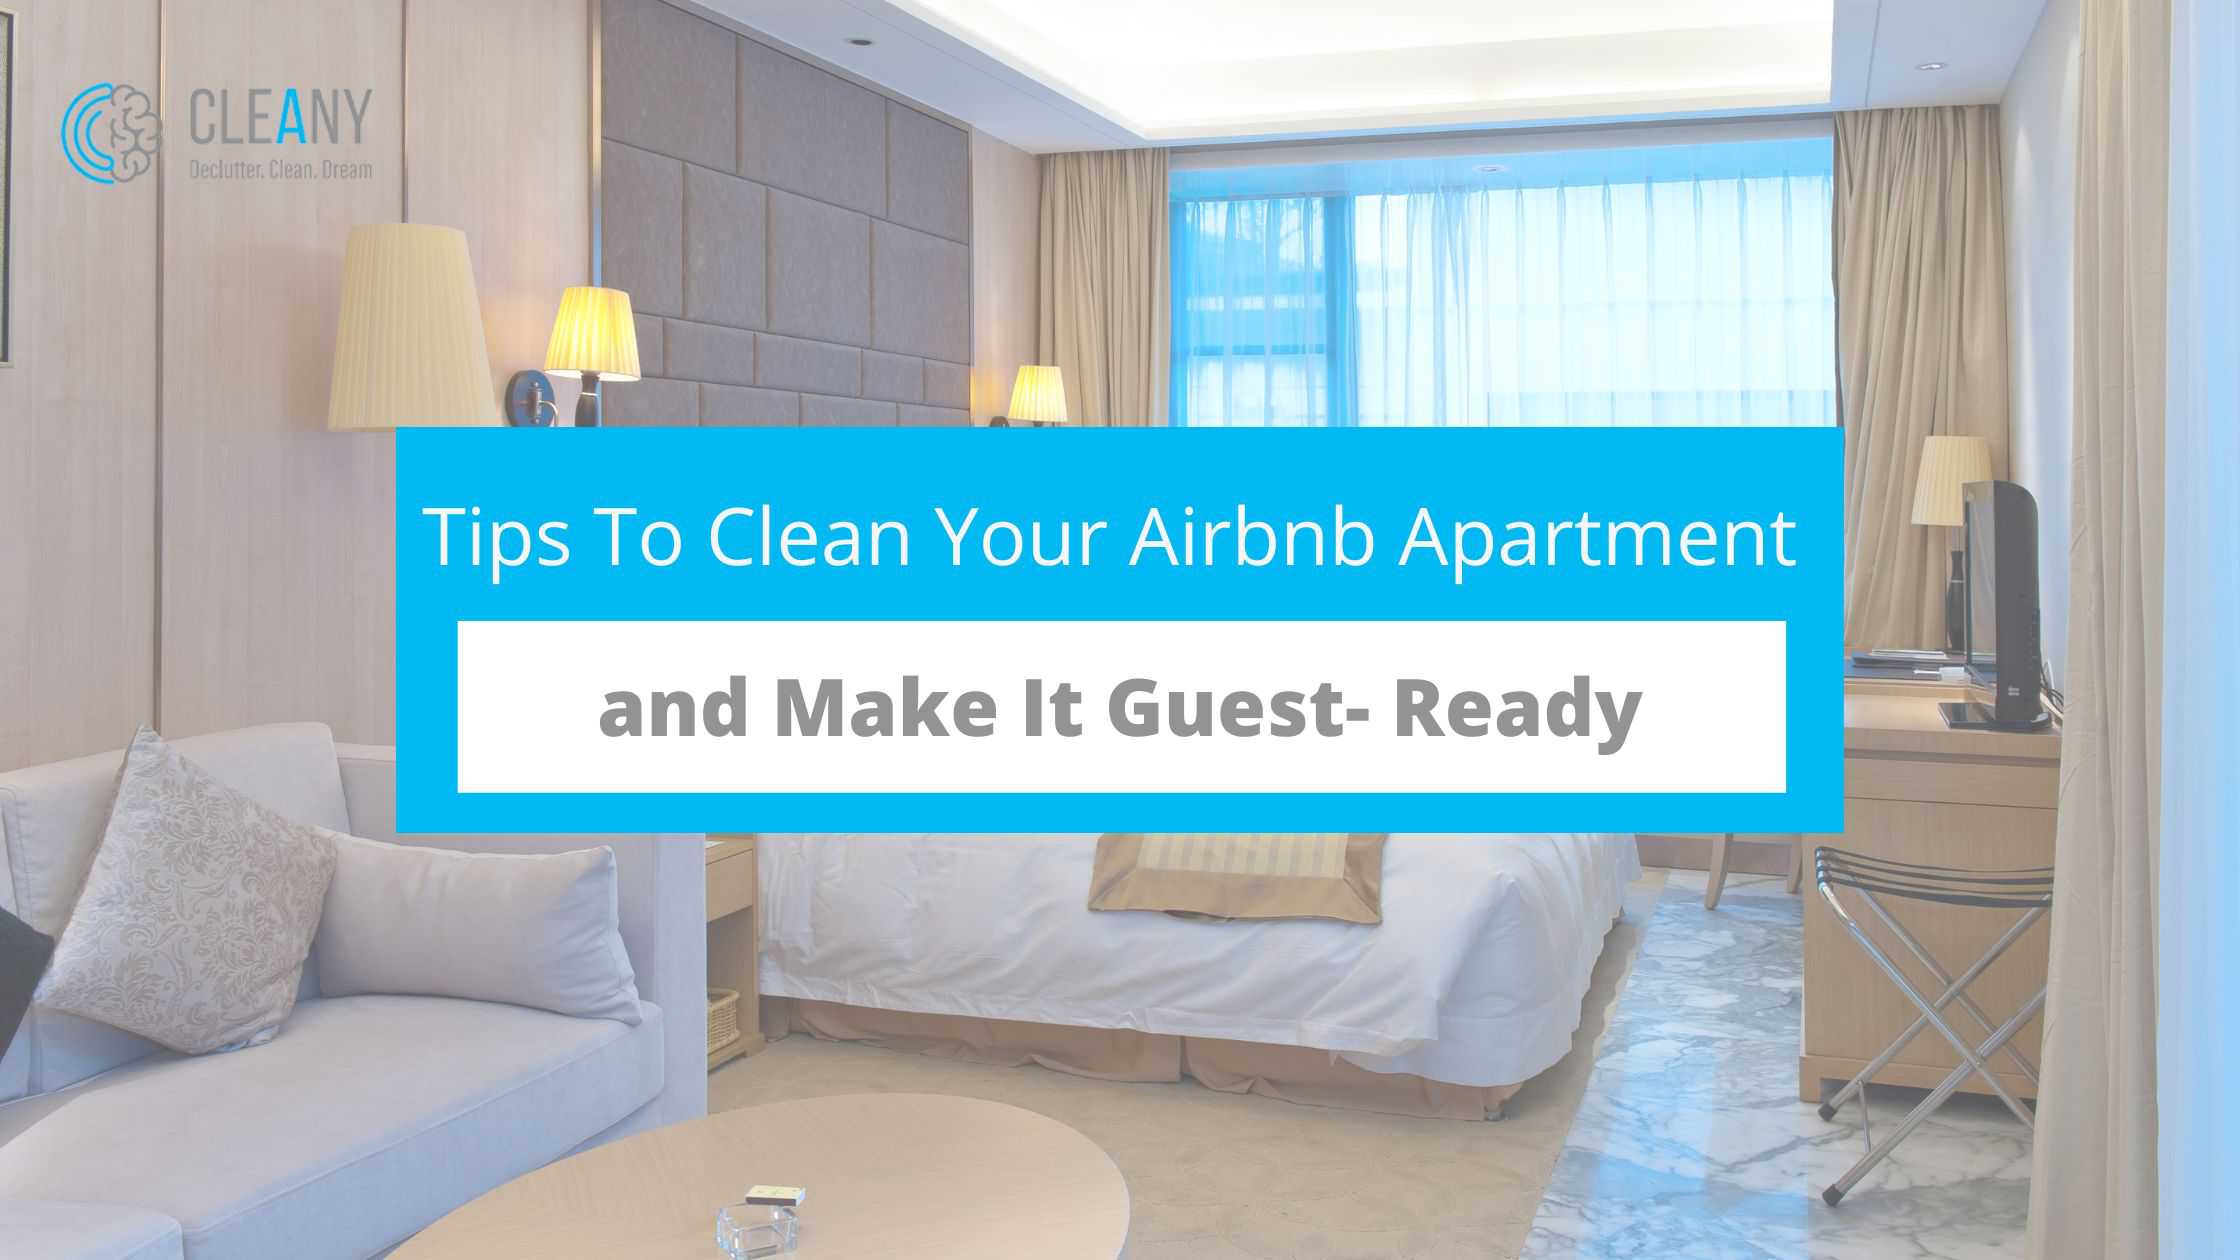 Clean Your Airbnb Apartment